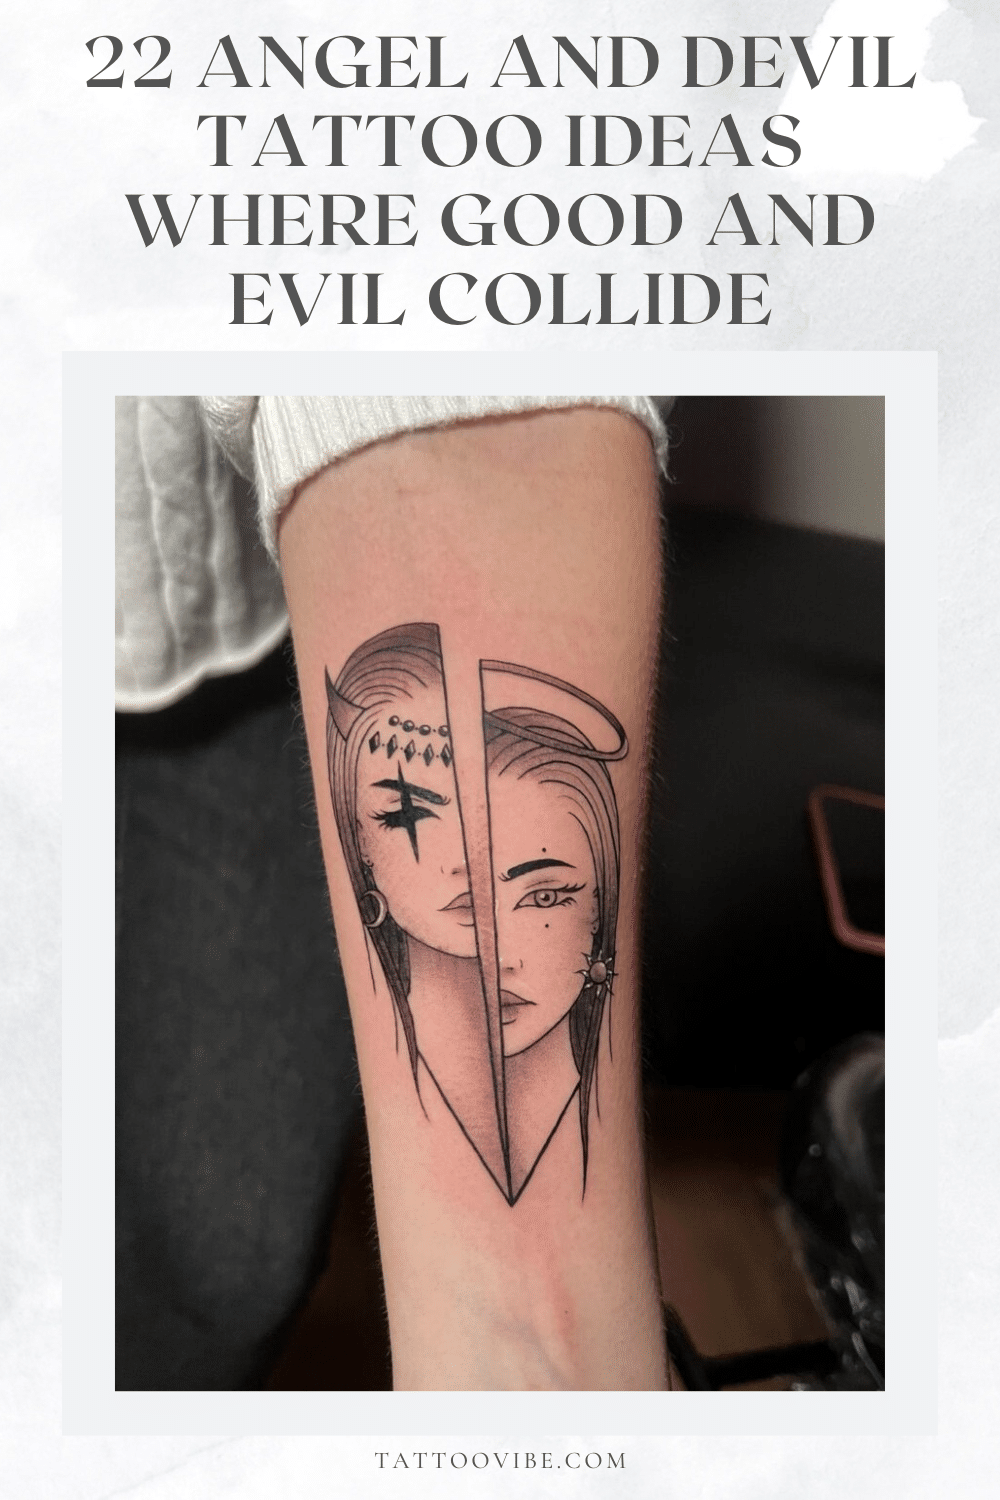 22 Angel And Devil Tattoo Ideas Where Good And Evil Collide